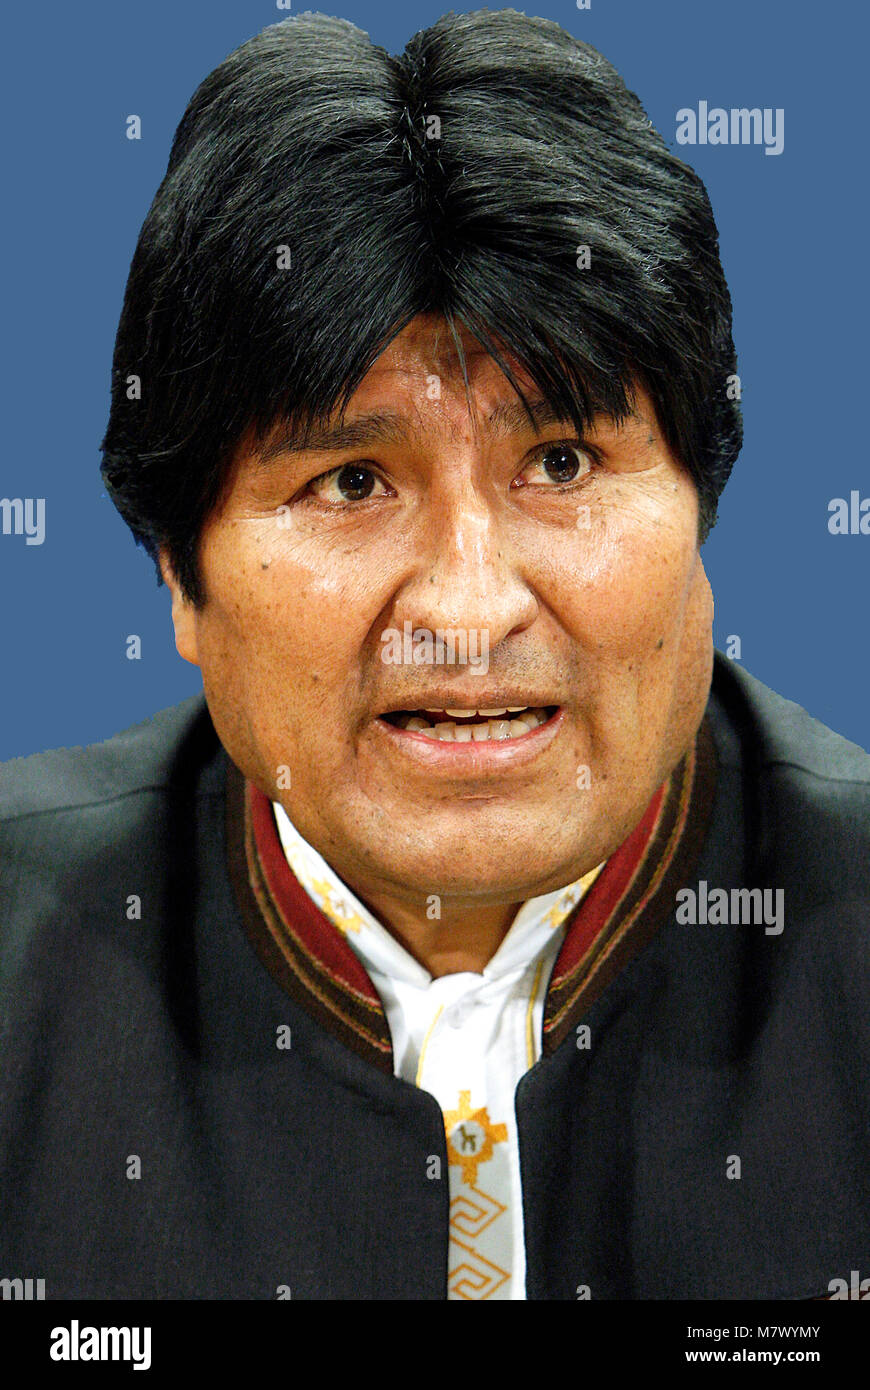 Evo Morales - *: President of Bolivia. Caution: For the editorial  use only. Not for advertising or other commercial use! Stock Photo - Alamy